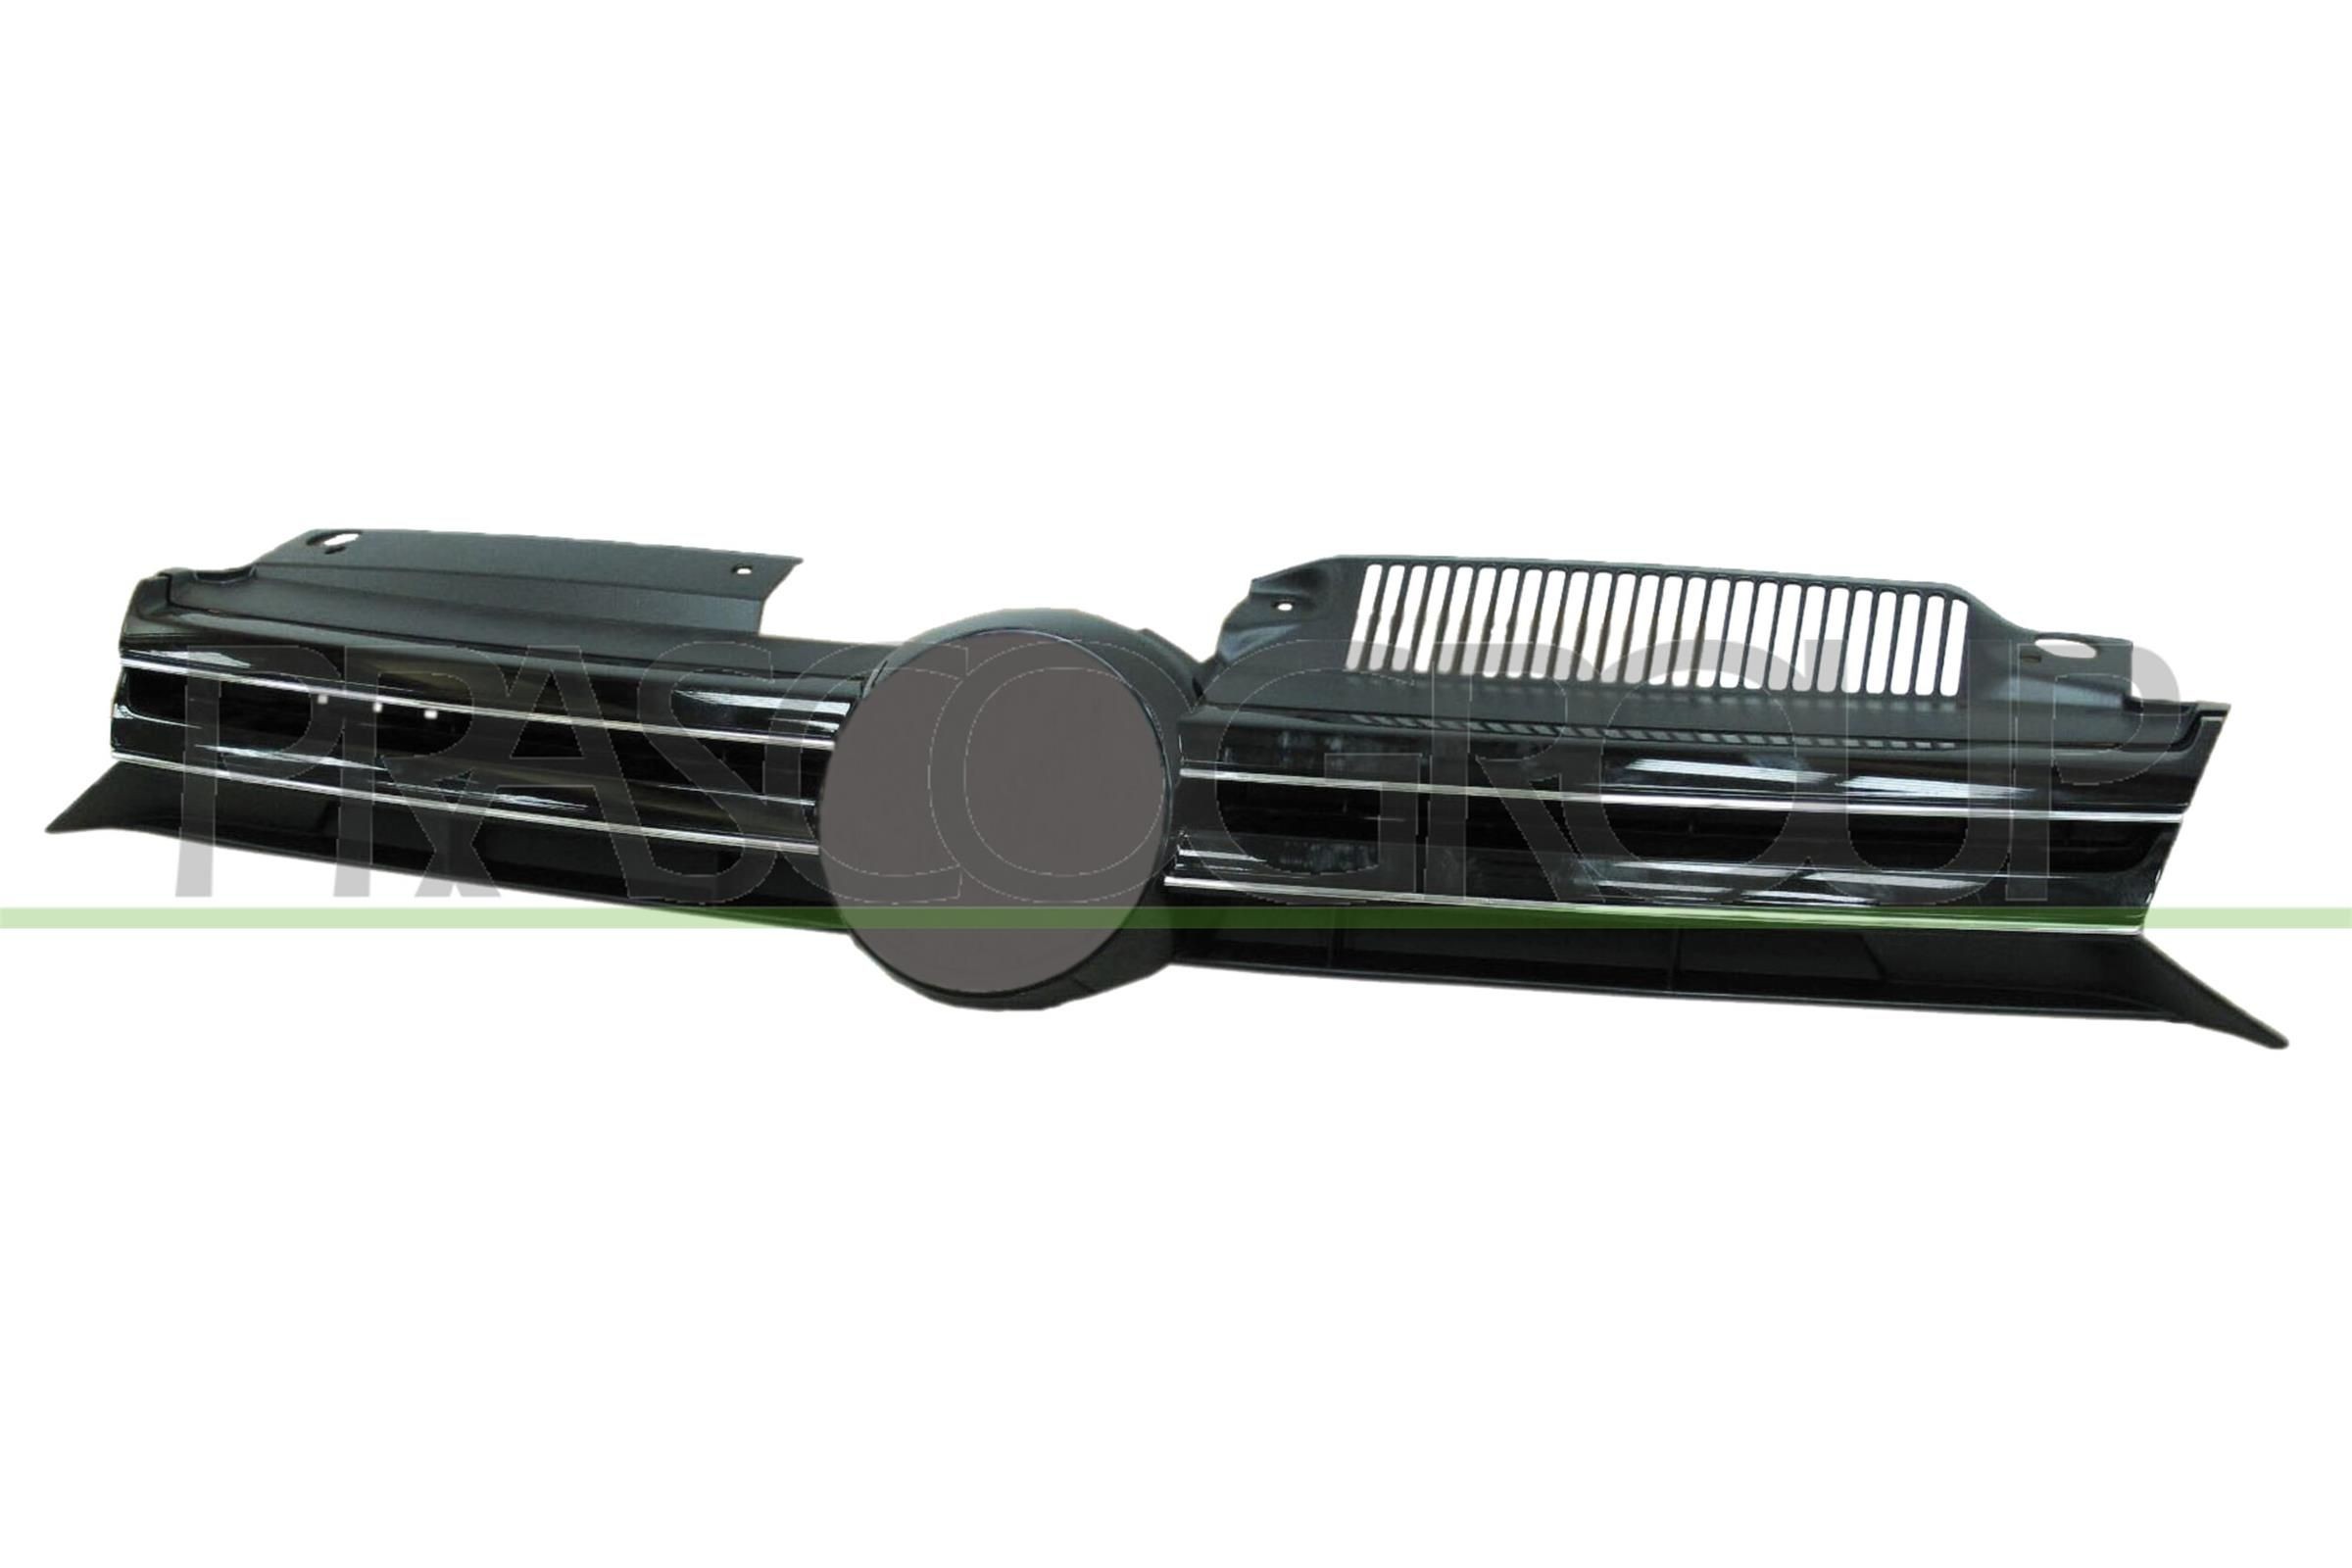 Original VG0382001 PRASCO Front grill experience and price